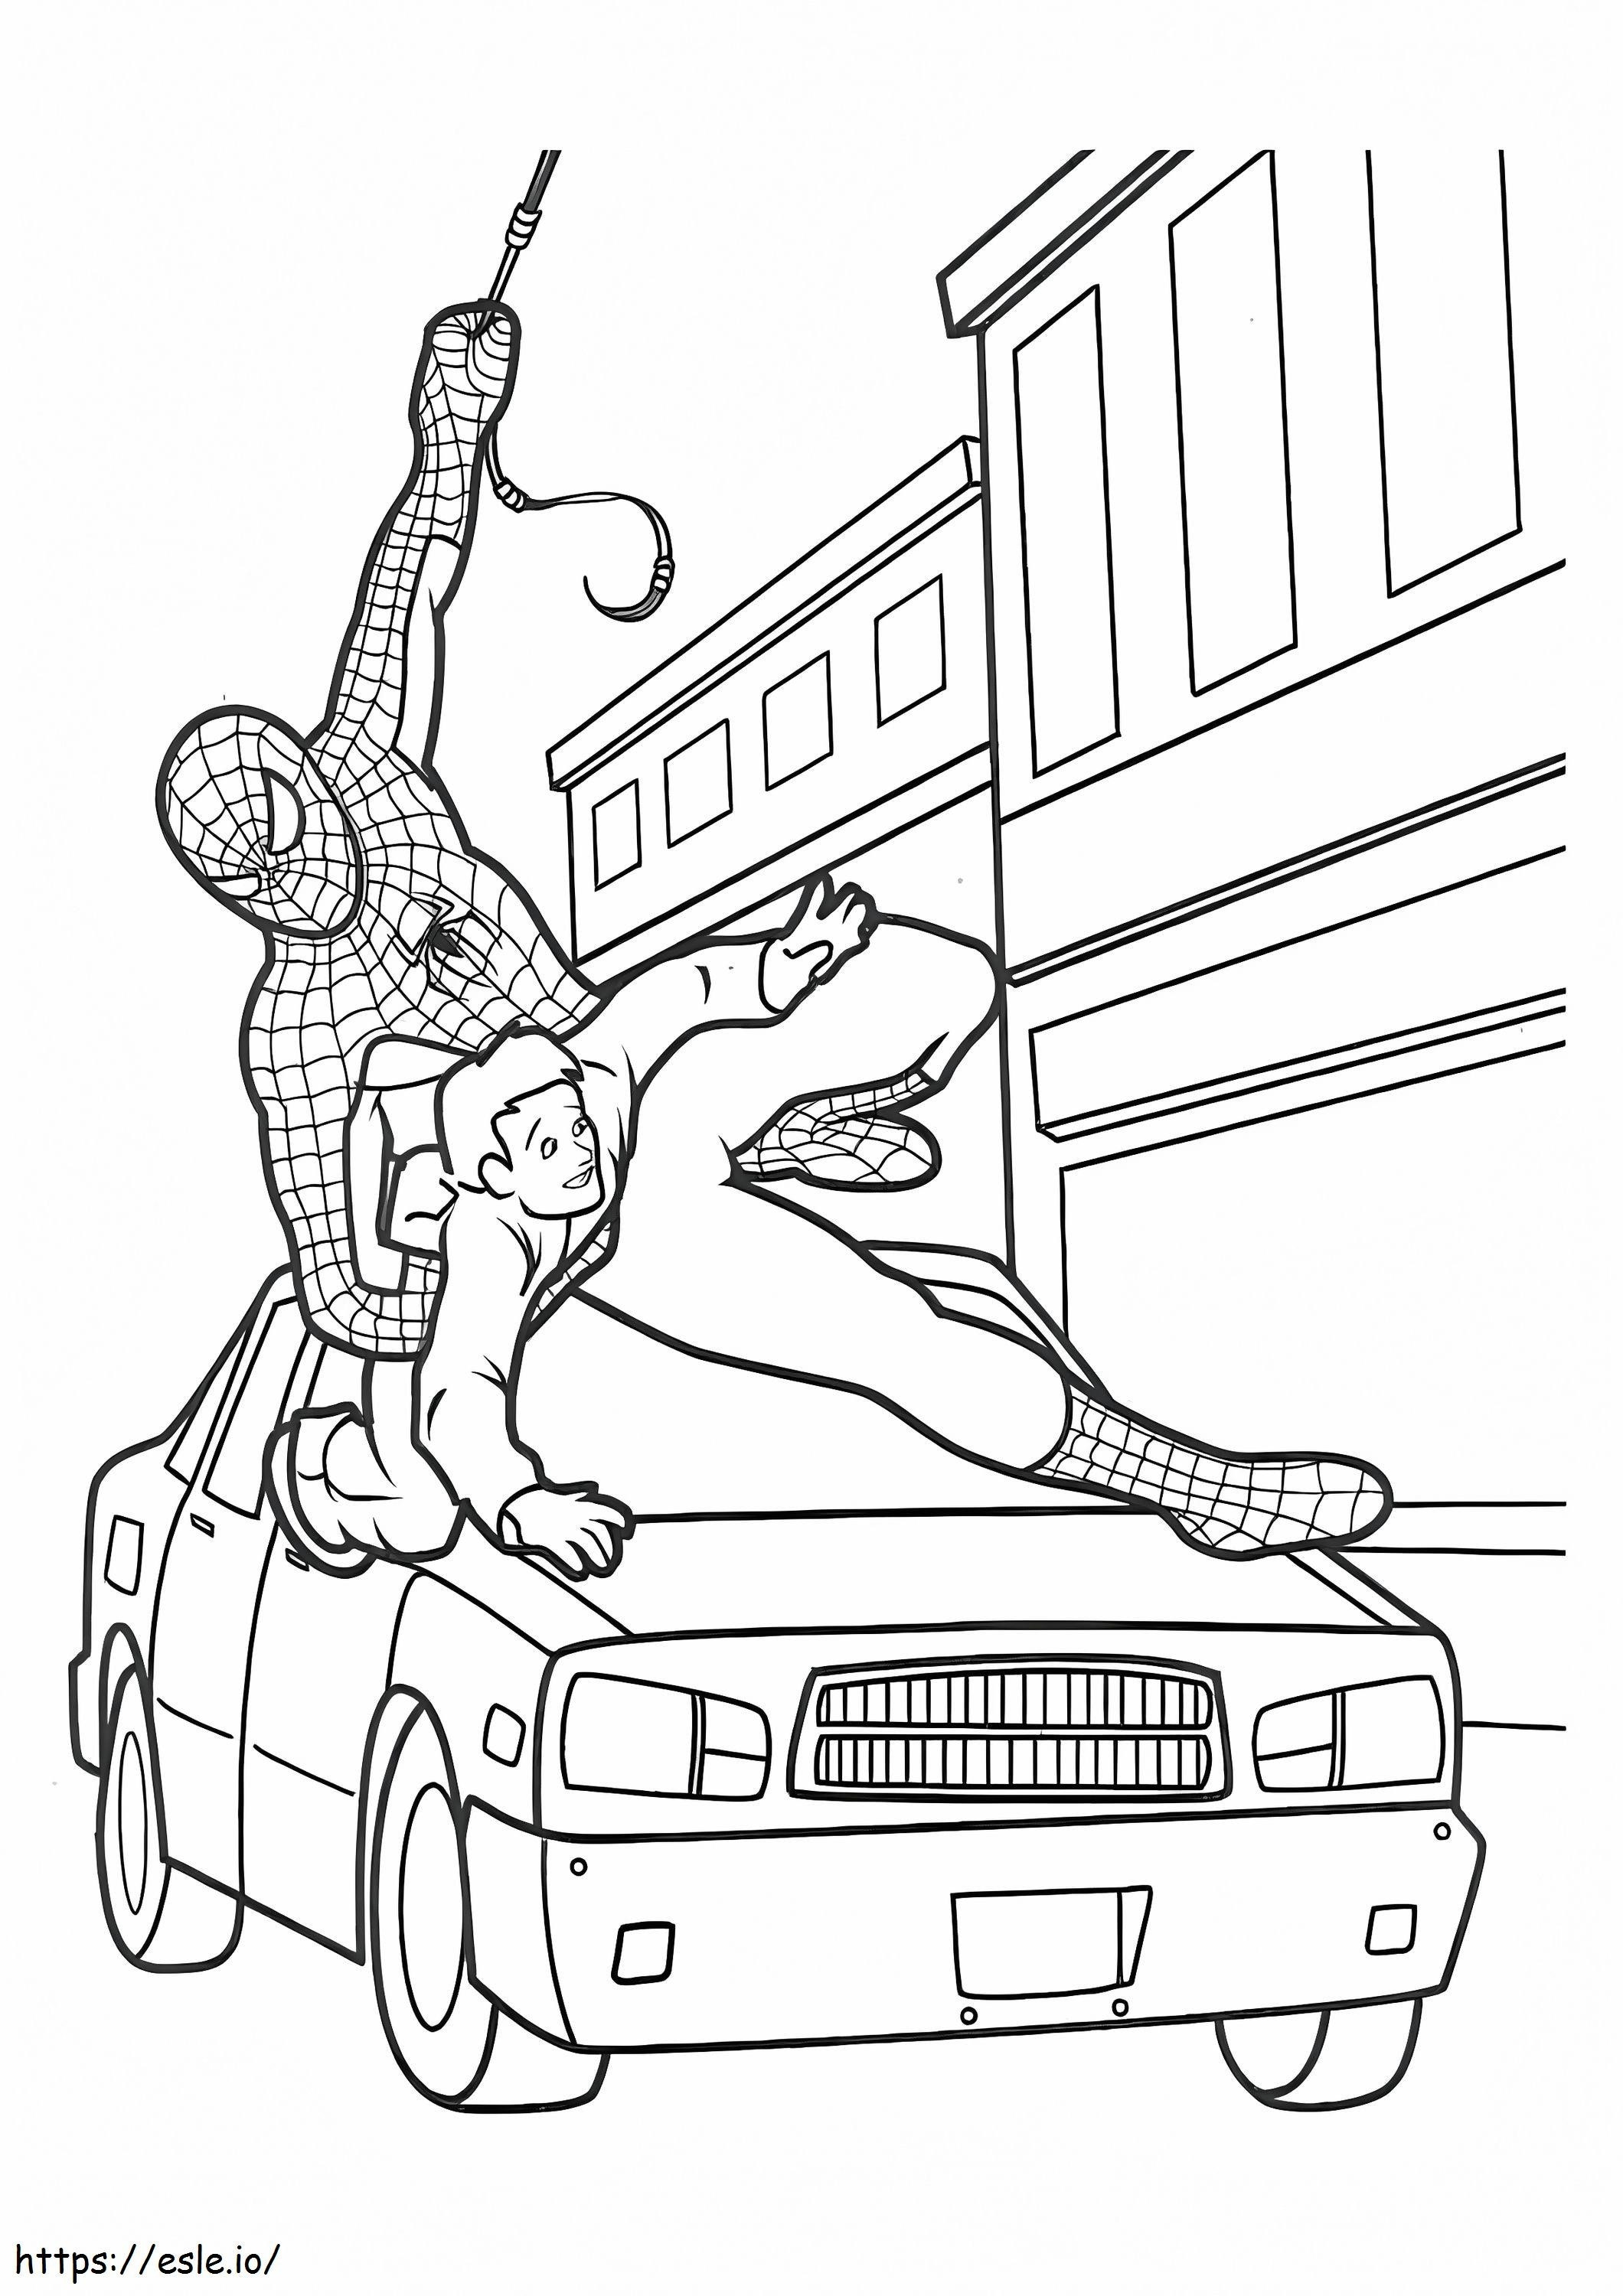 Spider Man Saves The Boy coloring page